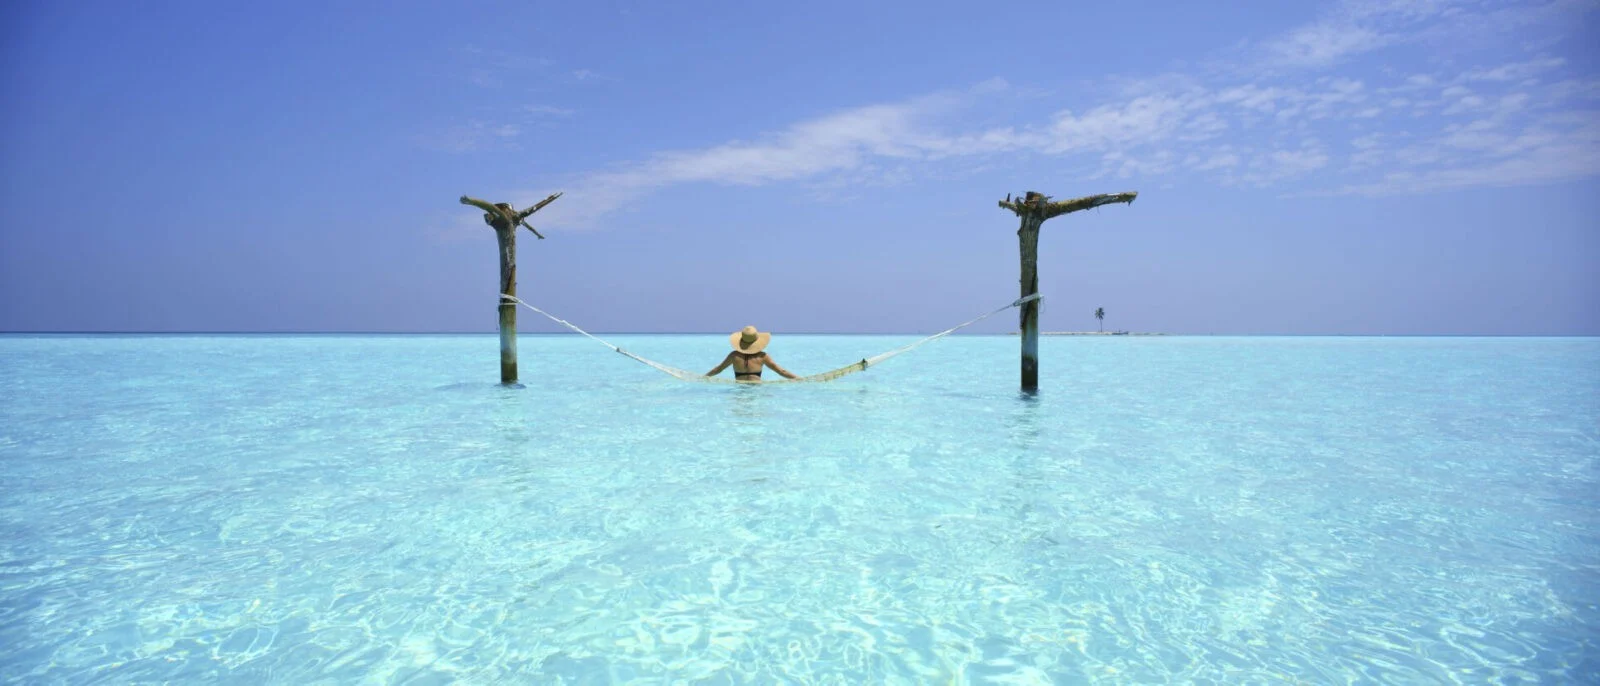 Flying Solo At Gili Lankanfushi – Introducing New Experiences For Single Travellers